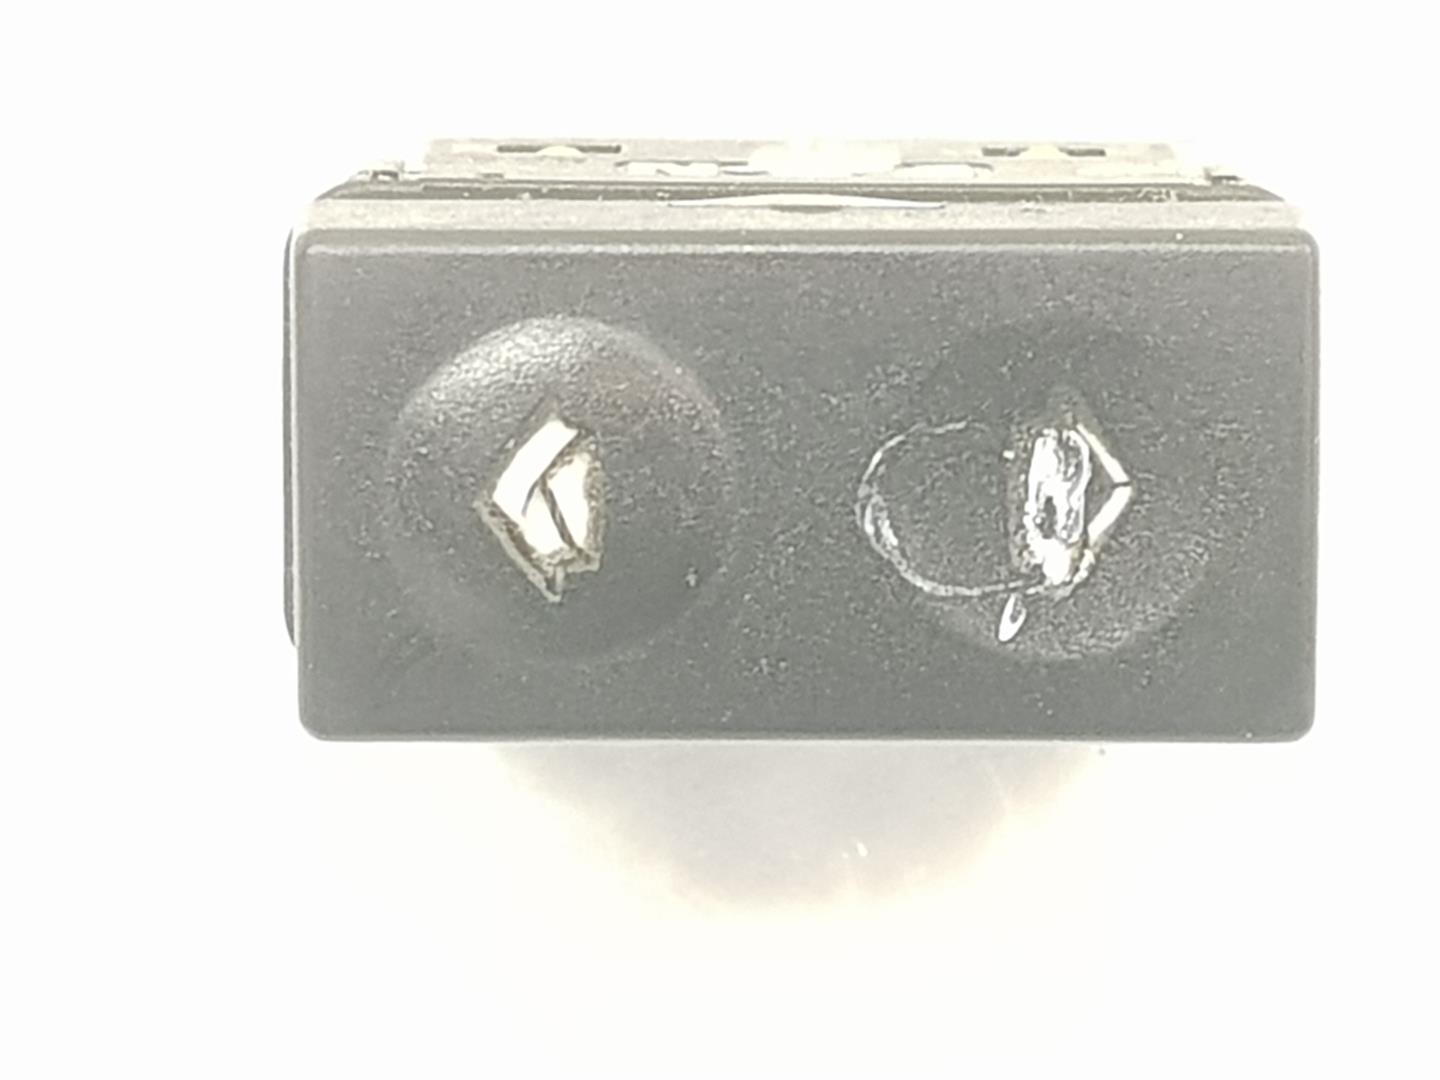 BMW 3 Series E36 (1990-2000) Front Right Door Window Switch 61318368941, 8368941 21455284